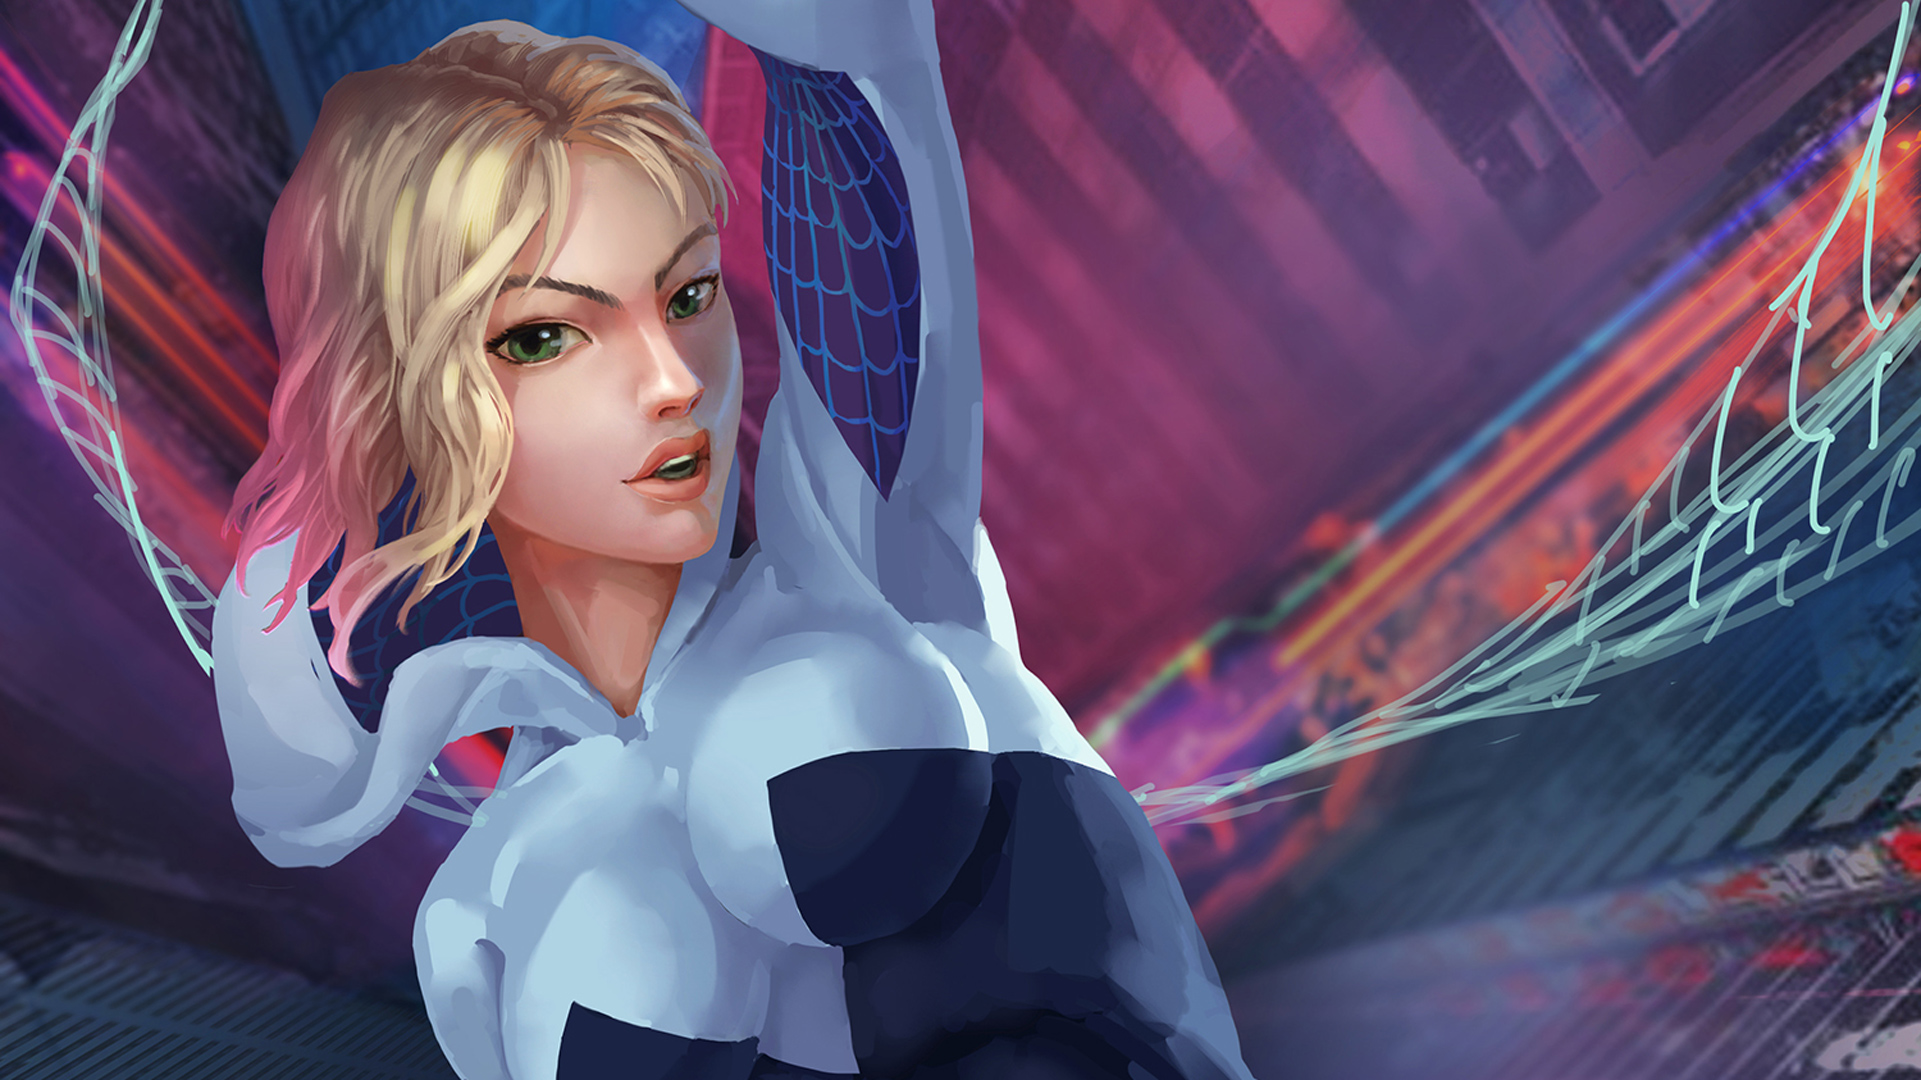 Spider Gwen Into The Spider Verse Art, HD Superheroes, 4k Wallpapers